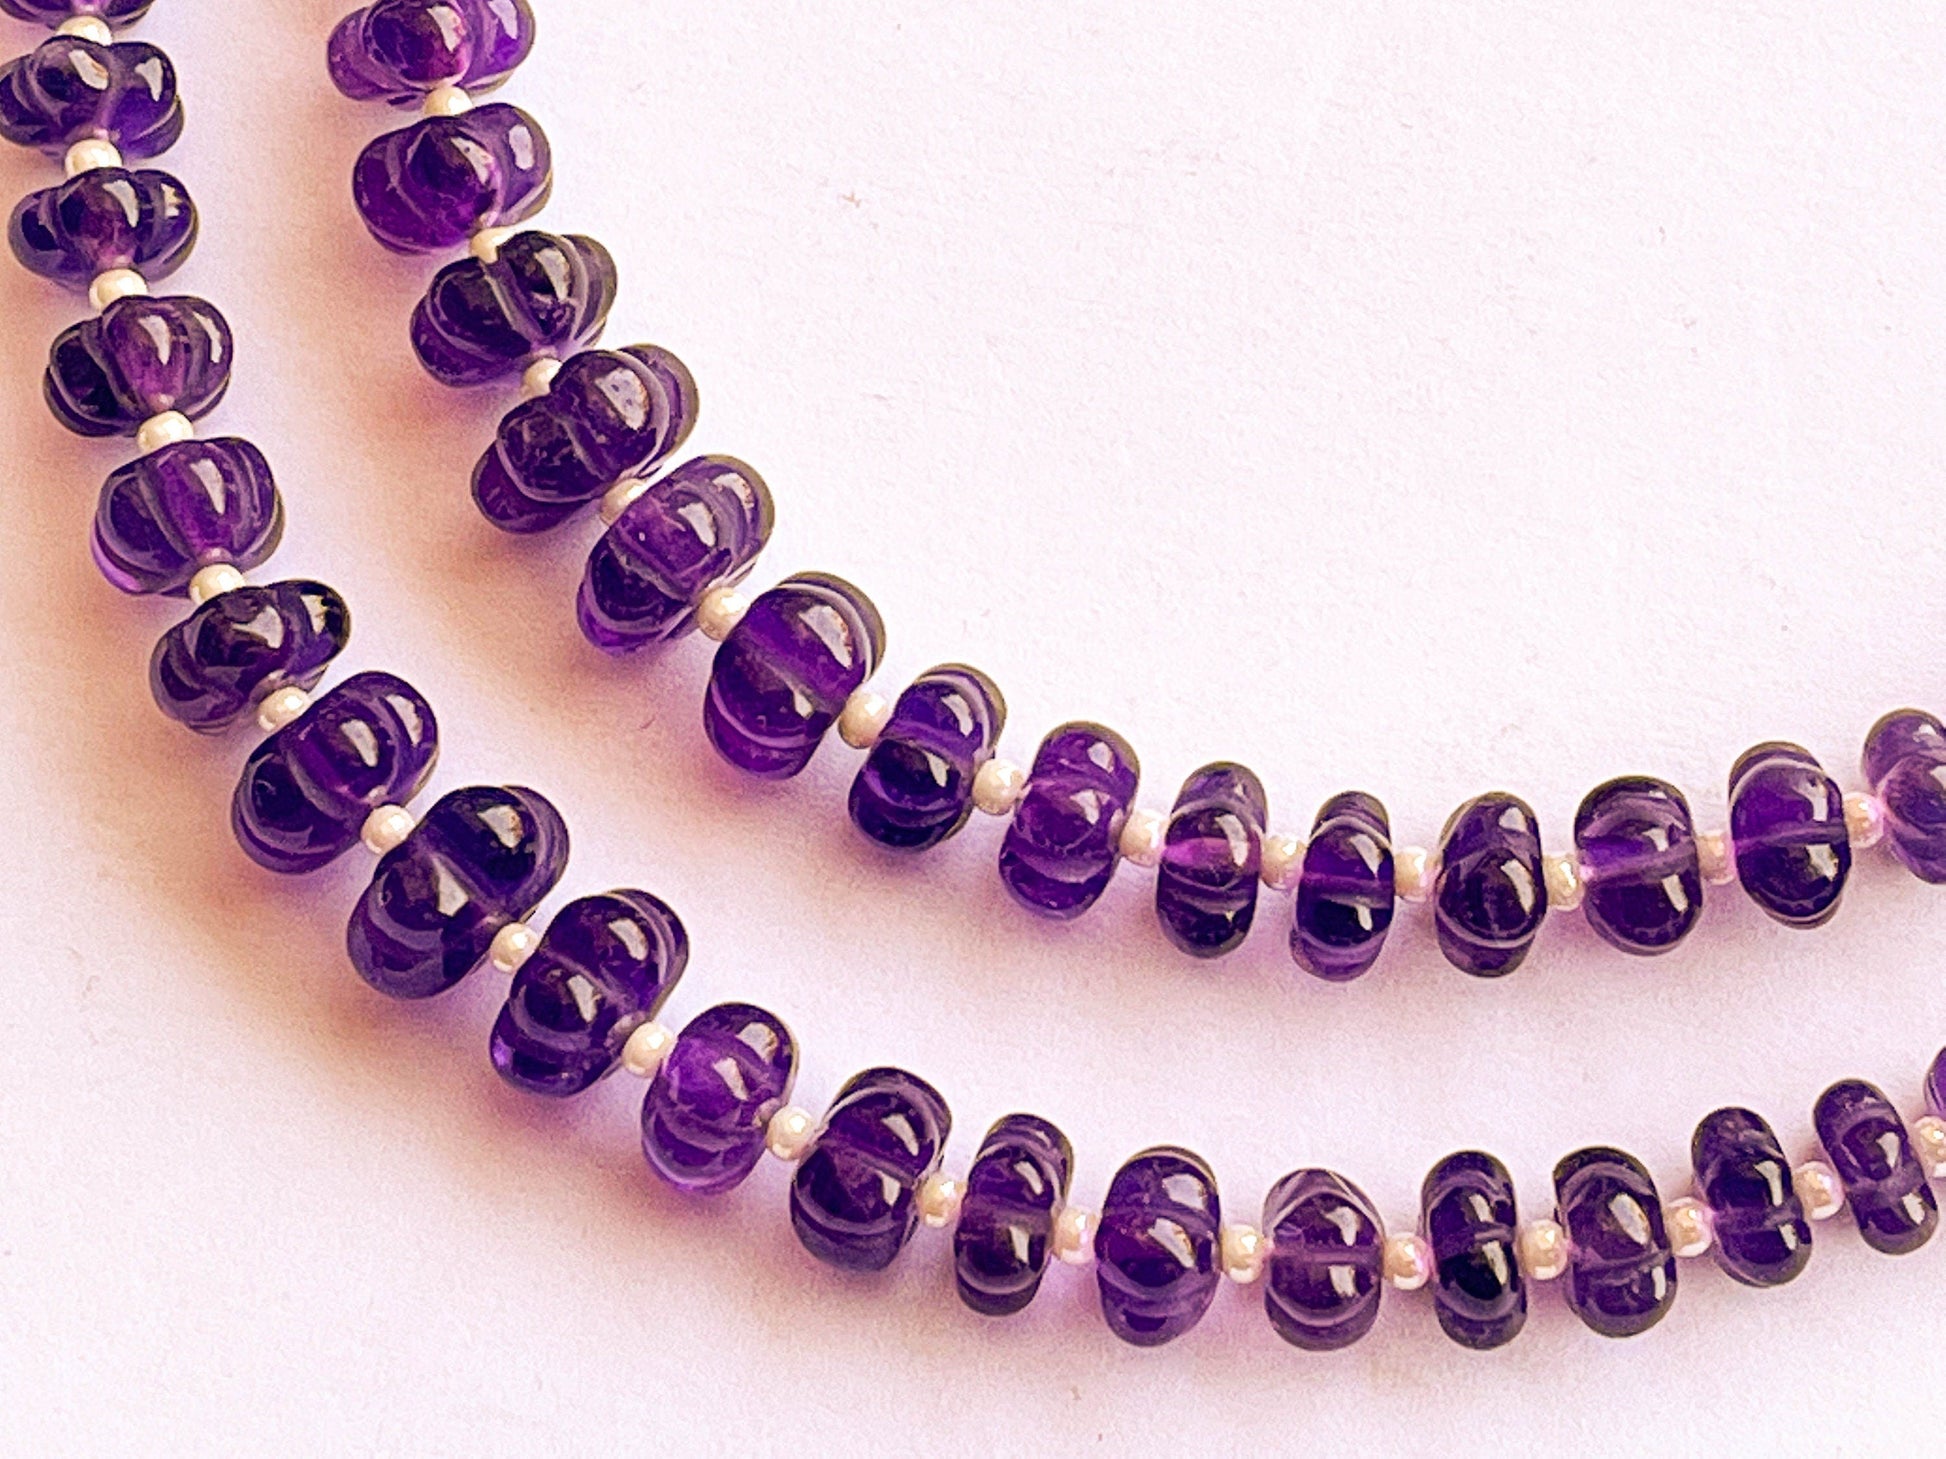 55 pieces AMETHYST Carved Melons beads, Natural Amethyst Beads, Amethyst Carving, Amethyst Gemstone, Amethyst Melons, 5mm to 8mm, 11 Inches Beadsforyourjewelry